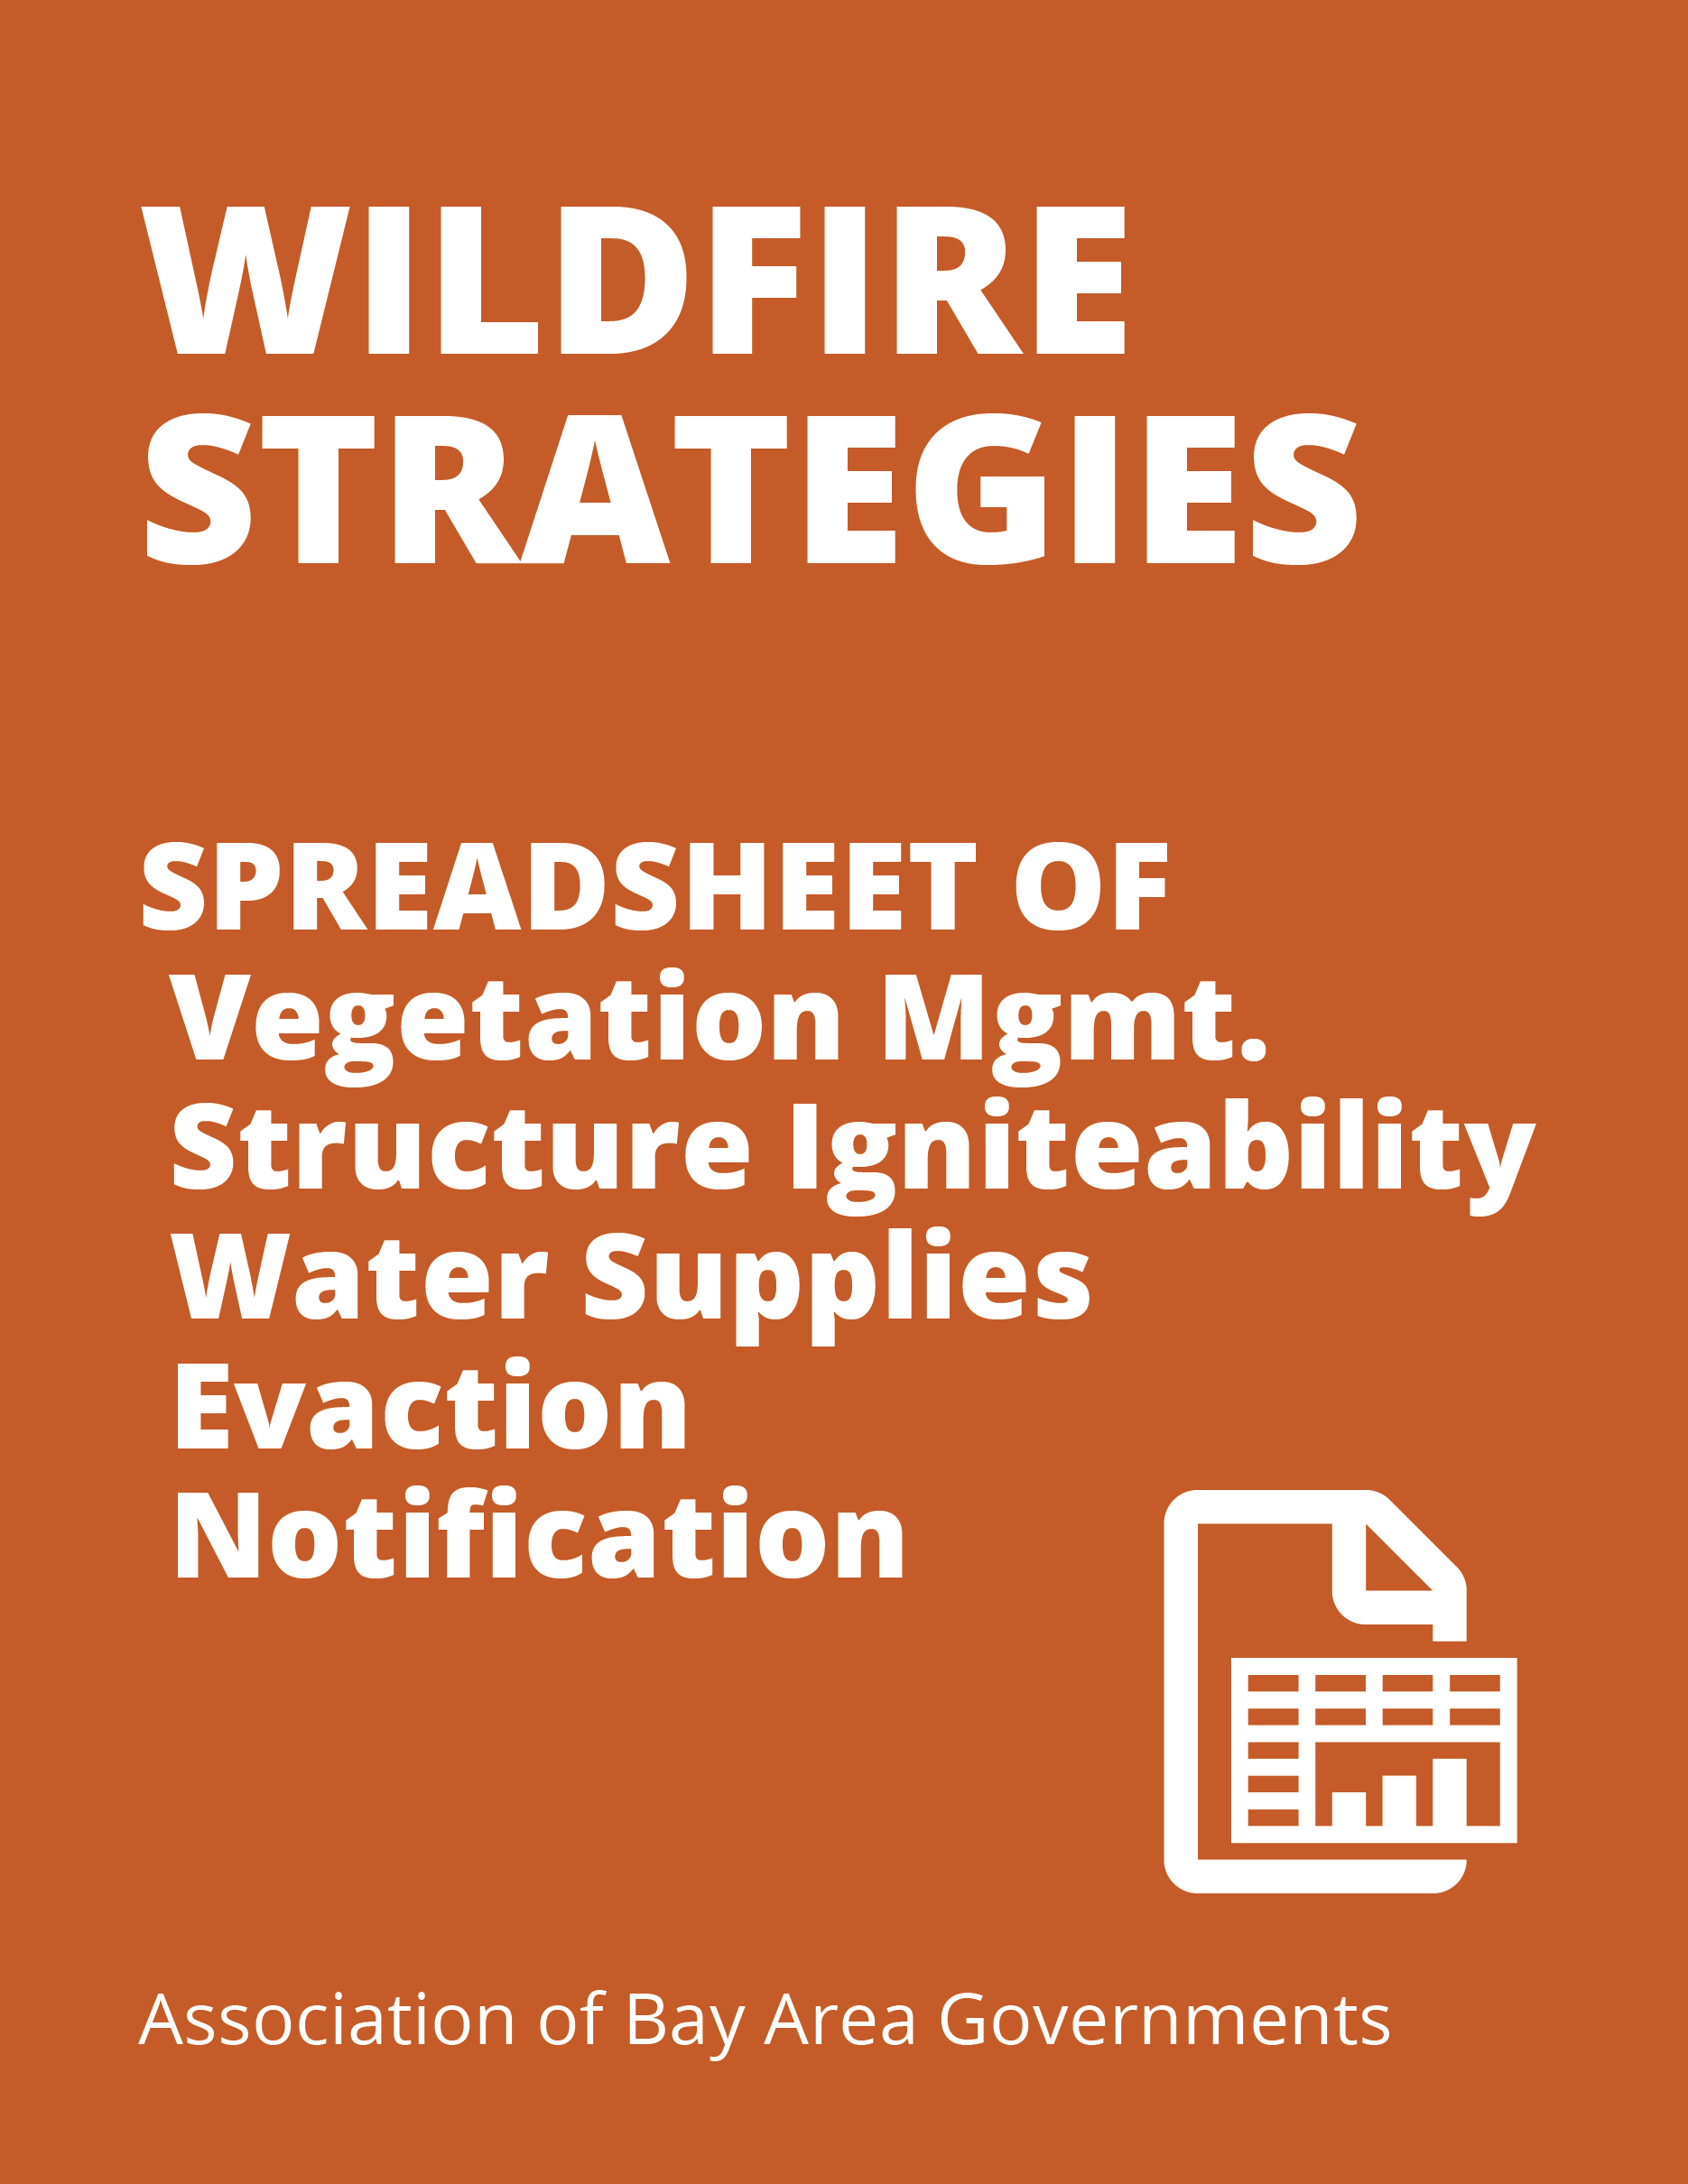 Wildfires Strategy Spreadsheet